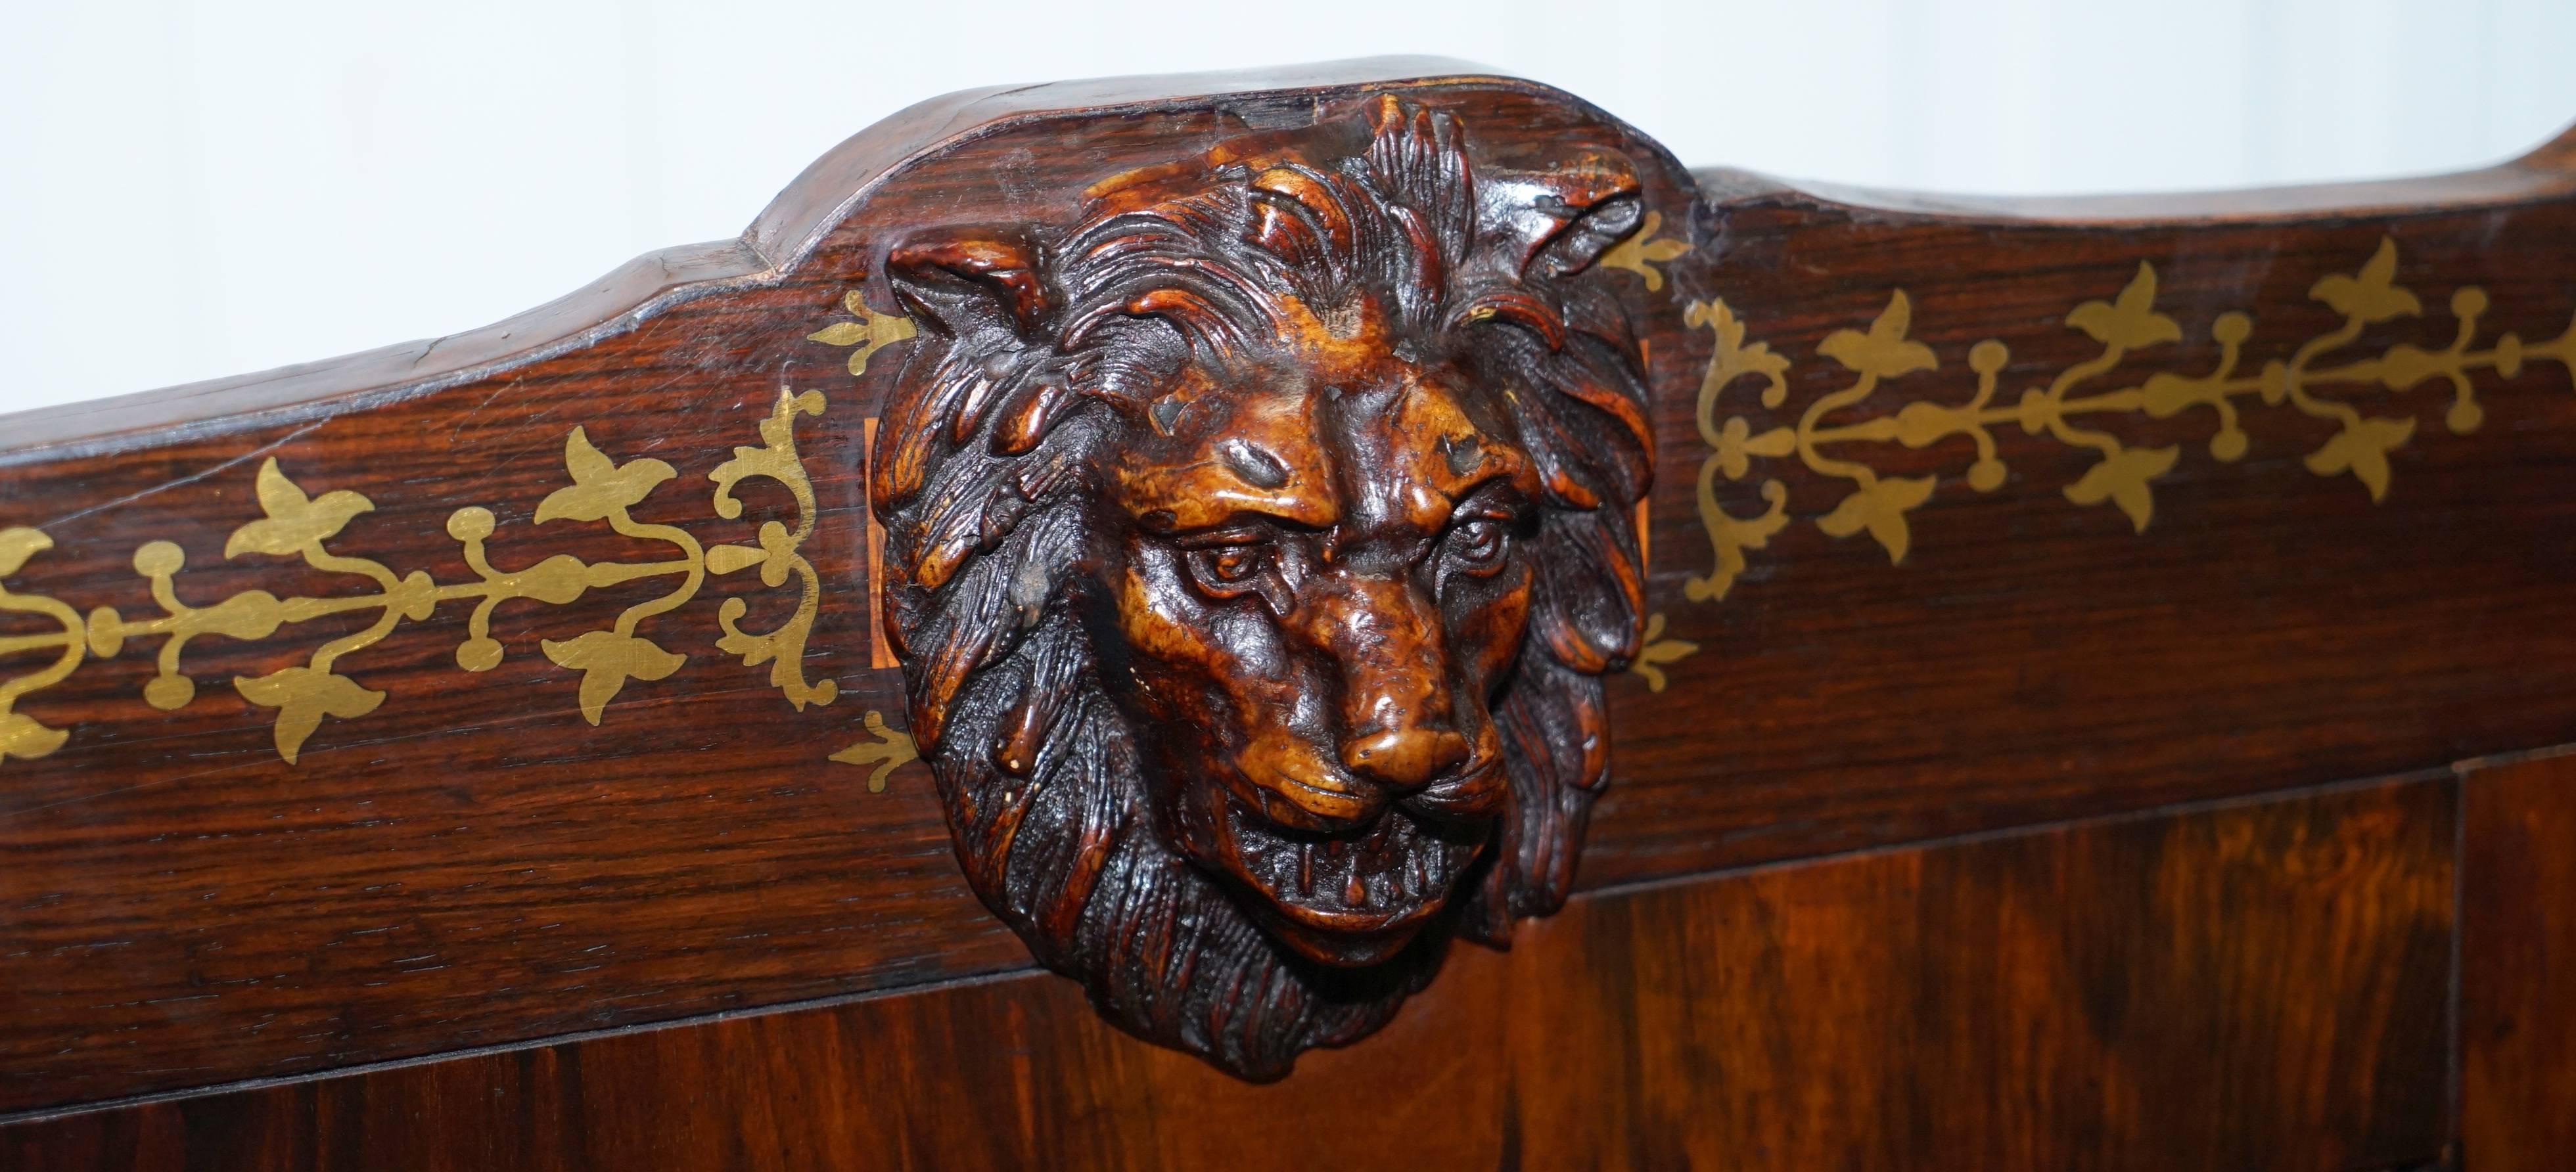 English Early Victorian Solid Burr Walnut Pew Seat Lion Carved Wood Chair under Storage